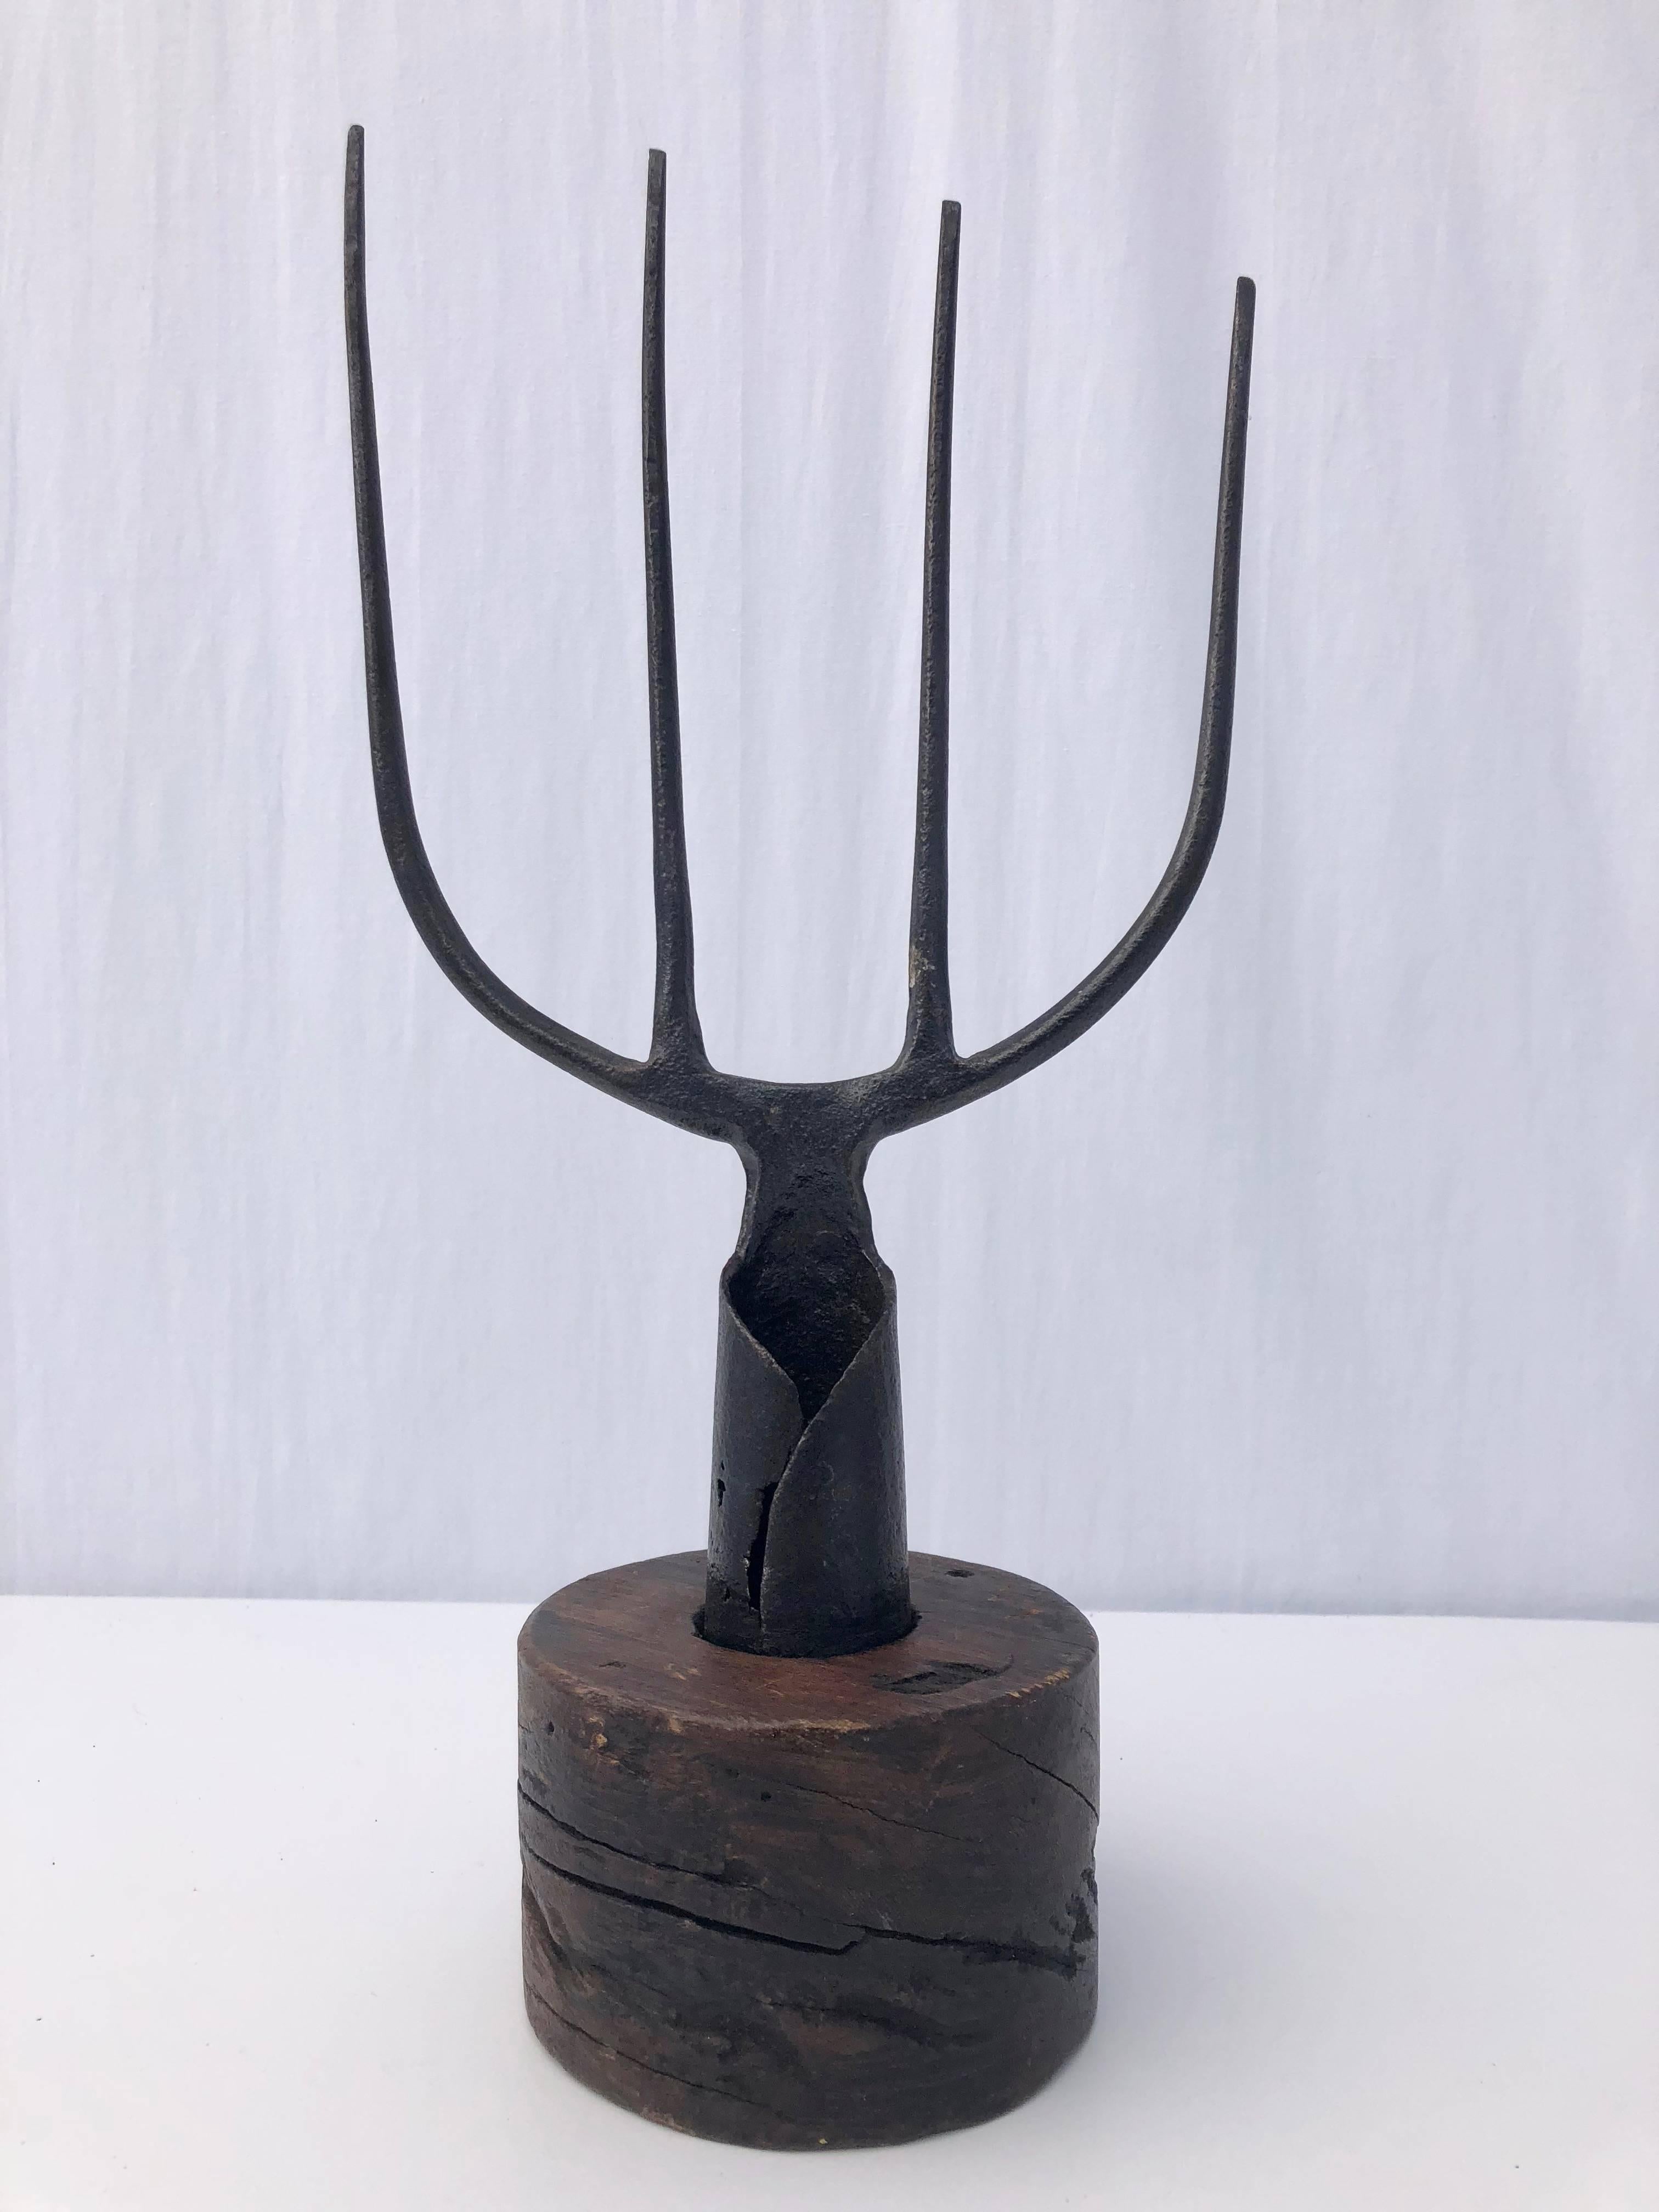 This French antique wrought iron farmer's fork on a wooden pedestal is a very unique decorative item.
The hand forged fork is asymmetrical and could also be used for a variety of different purposes, adding a 1700s French touch.